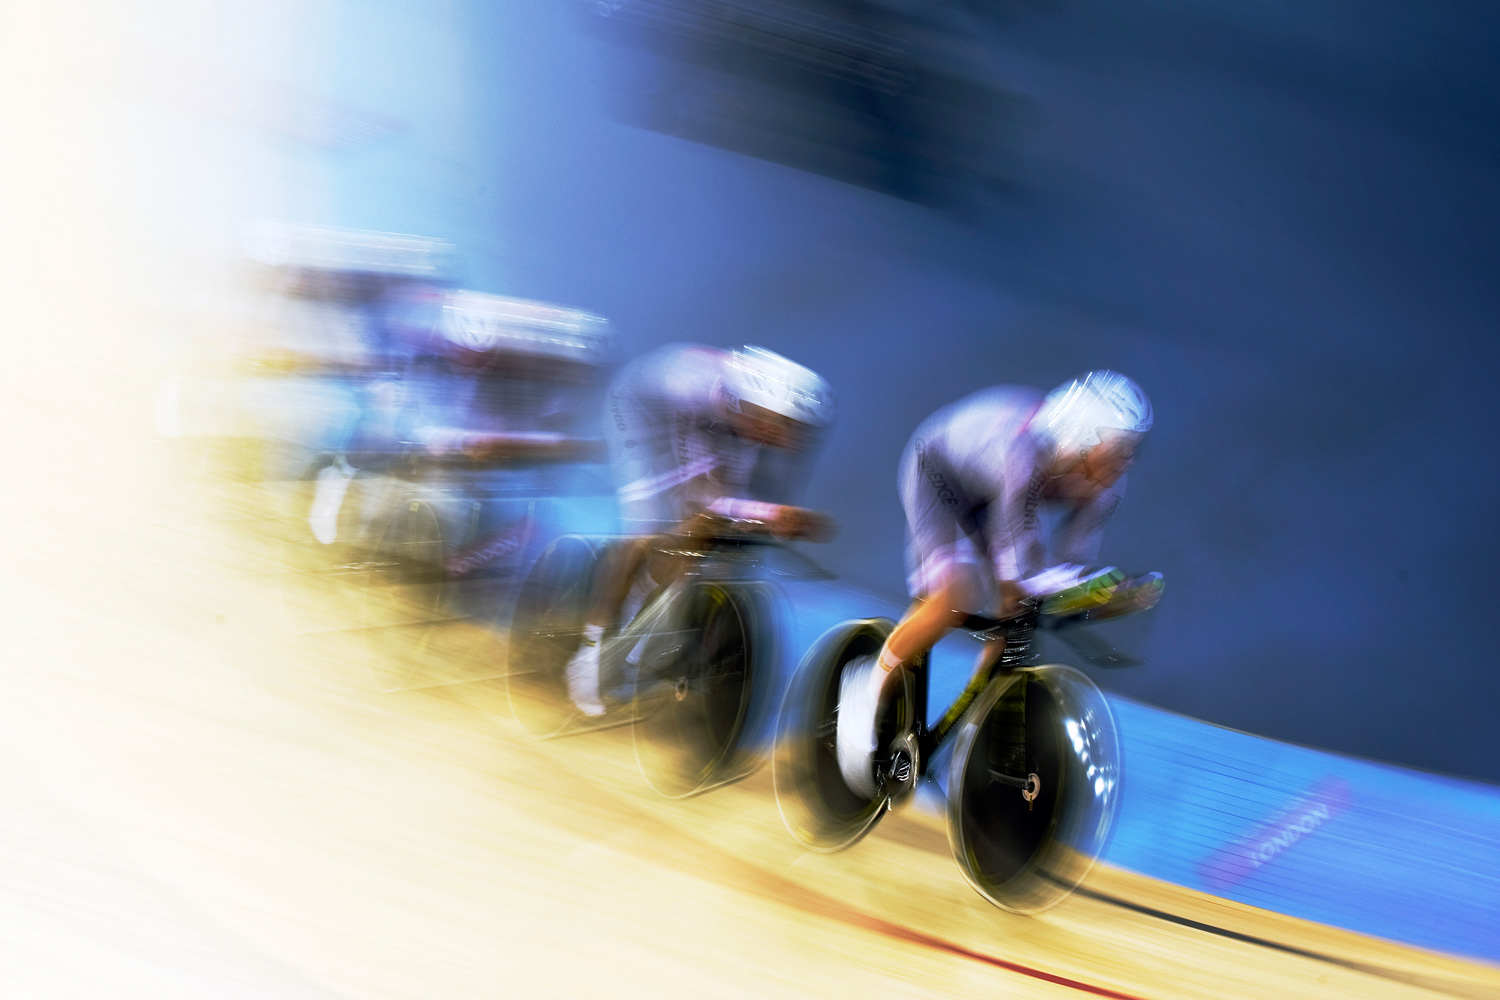 Feb. 16, 2012. Australia's Luke Durbridge, Rohan Dennis, Alexander Edmondson and Michael Hepburn compete during the Men's Team Pursuit qualification round at the UCI Track Cycling World Cup, a test event for the London 2012 Olympic Games, at the Velodrome in the Olympic Park in London.